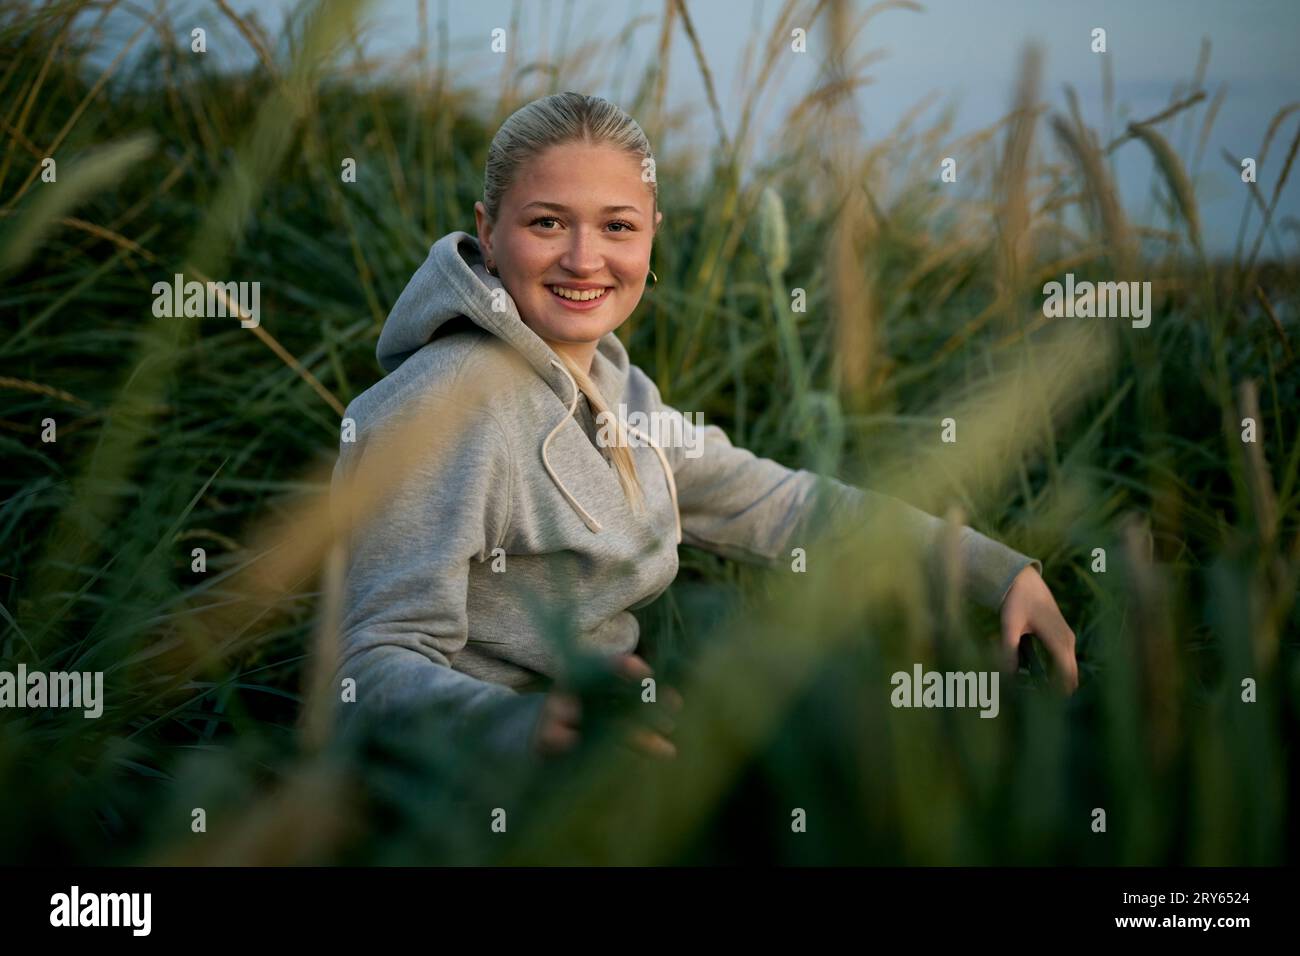 Smiling woman sitting amidst tall grass in rural field Stock Photo